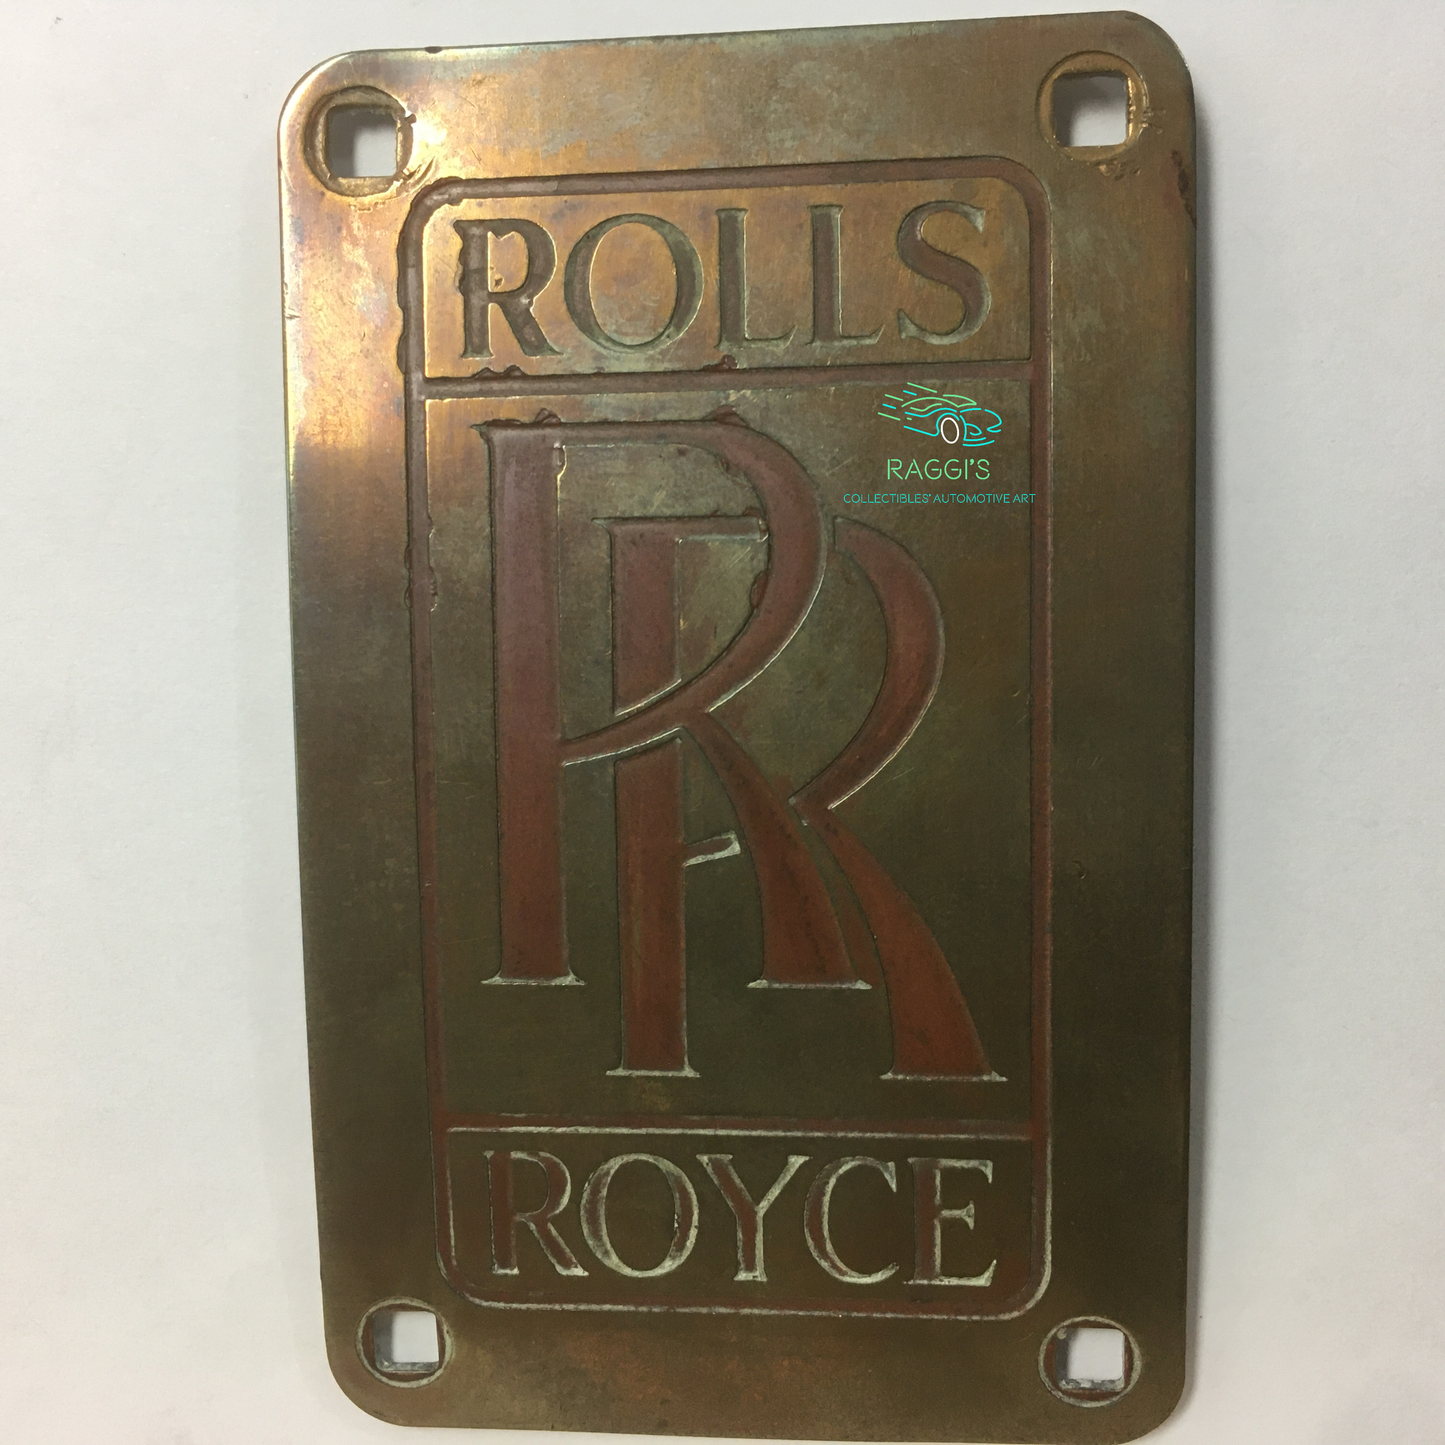 Rolls-Royce, Original Brass Emblem with Red Letters, Extremely Rare